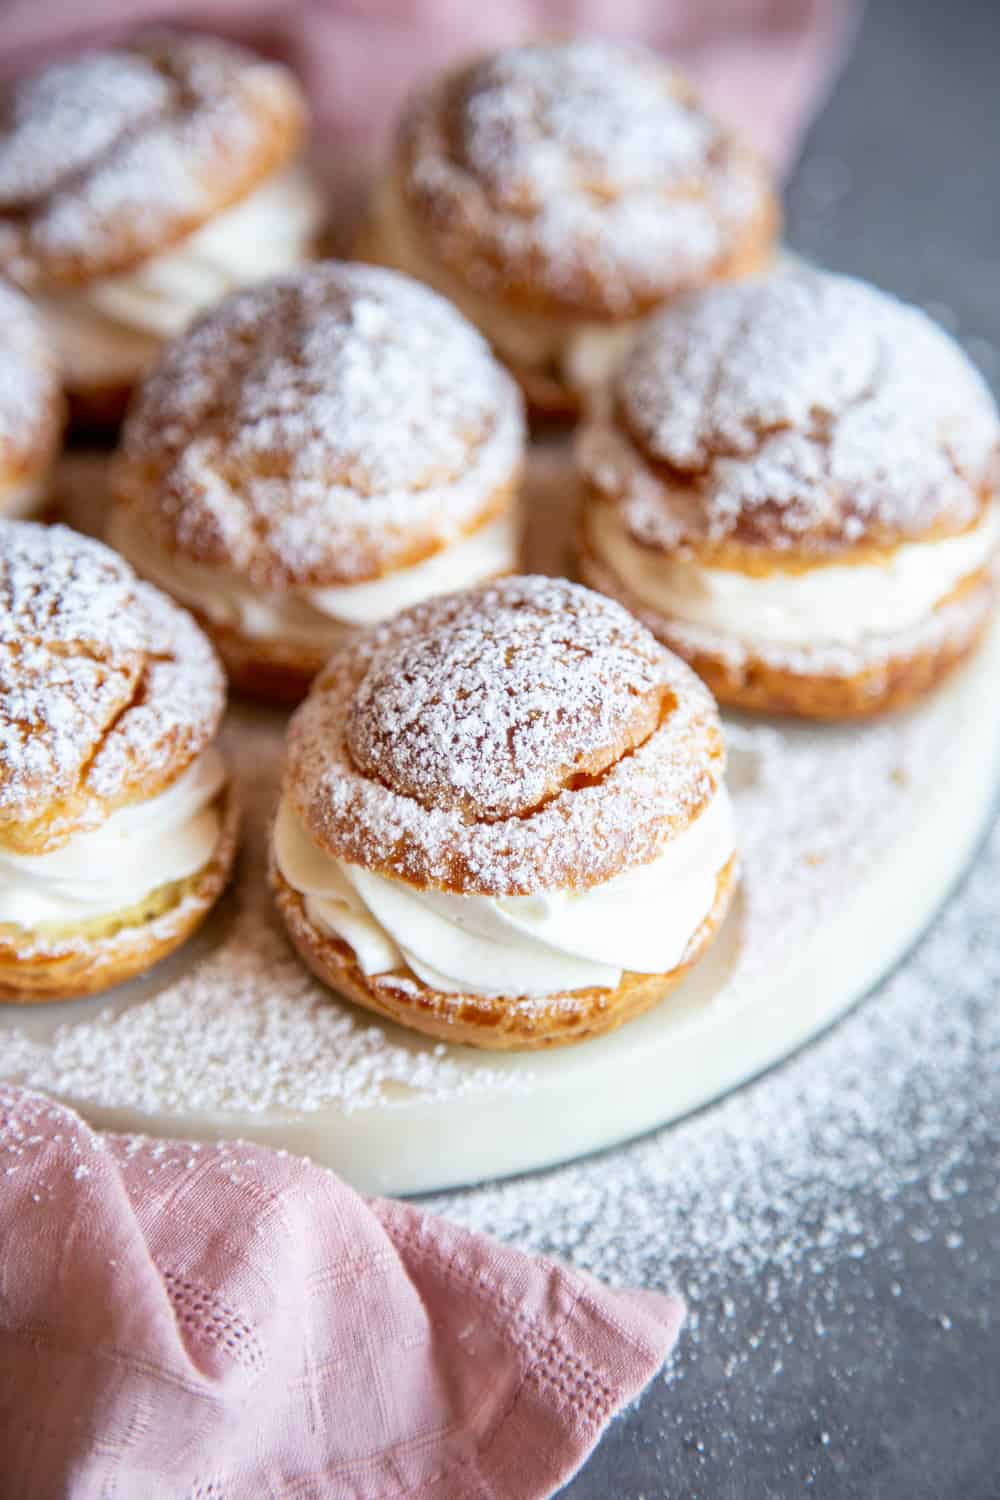 Cream puffs on a serving plate